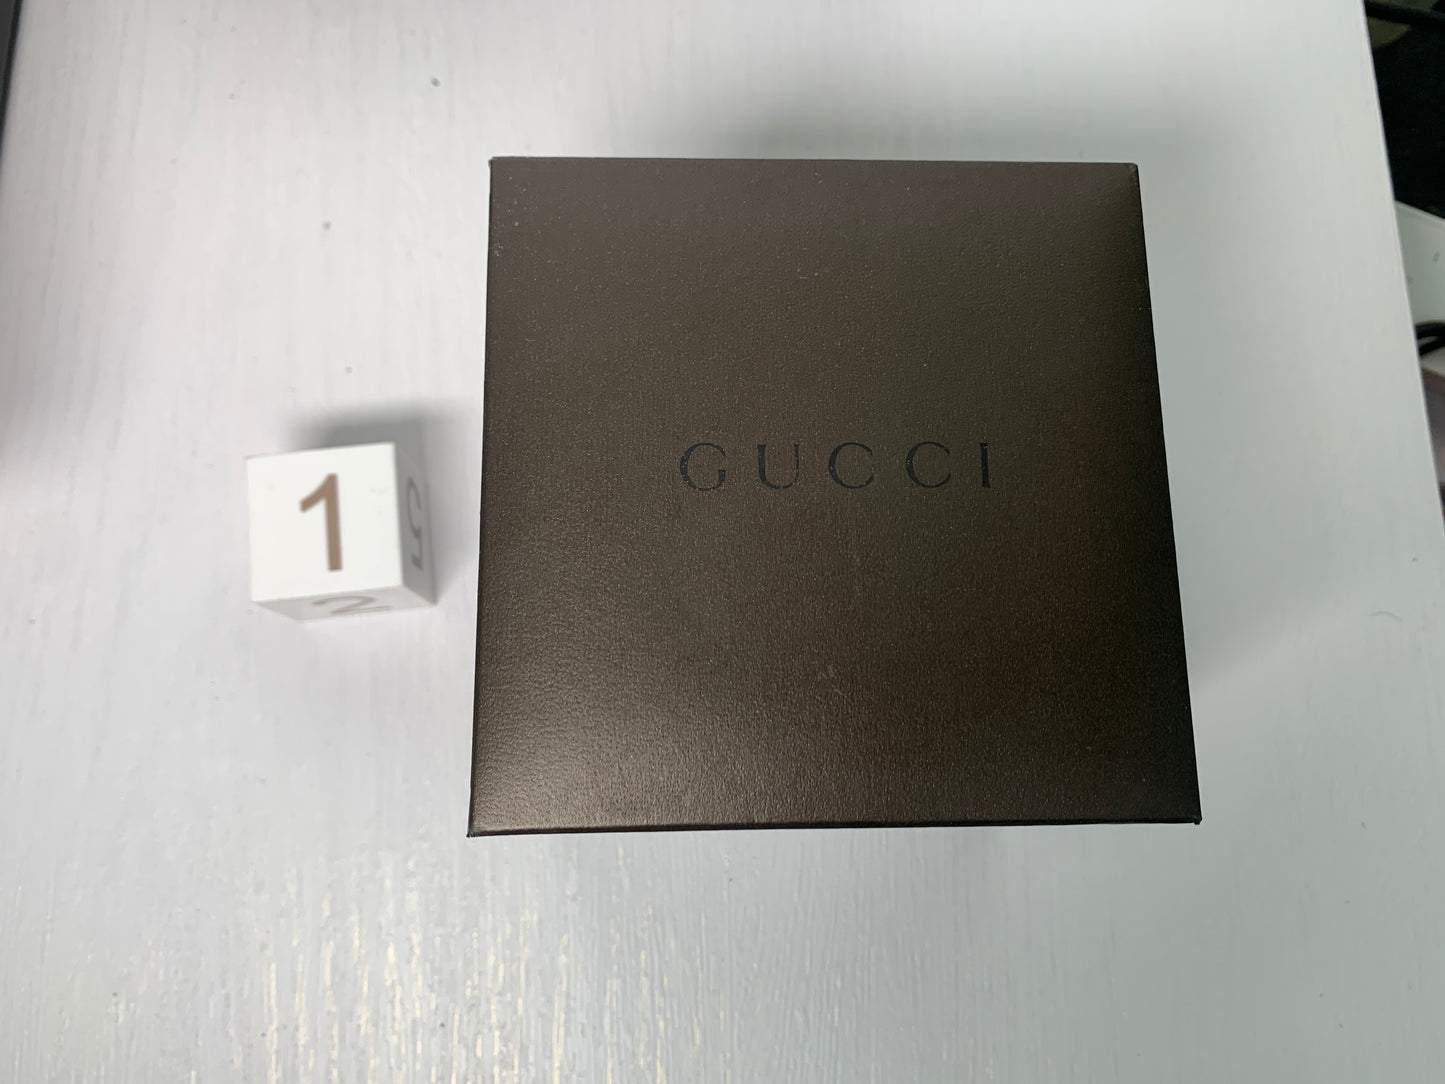 Gucci gift box for jewlley necklace scarf box wallet bag